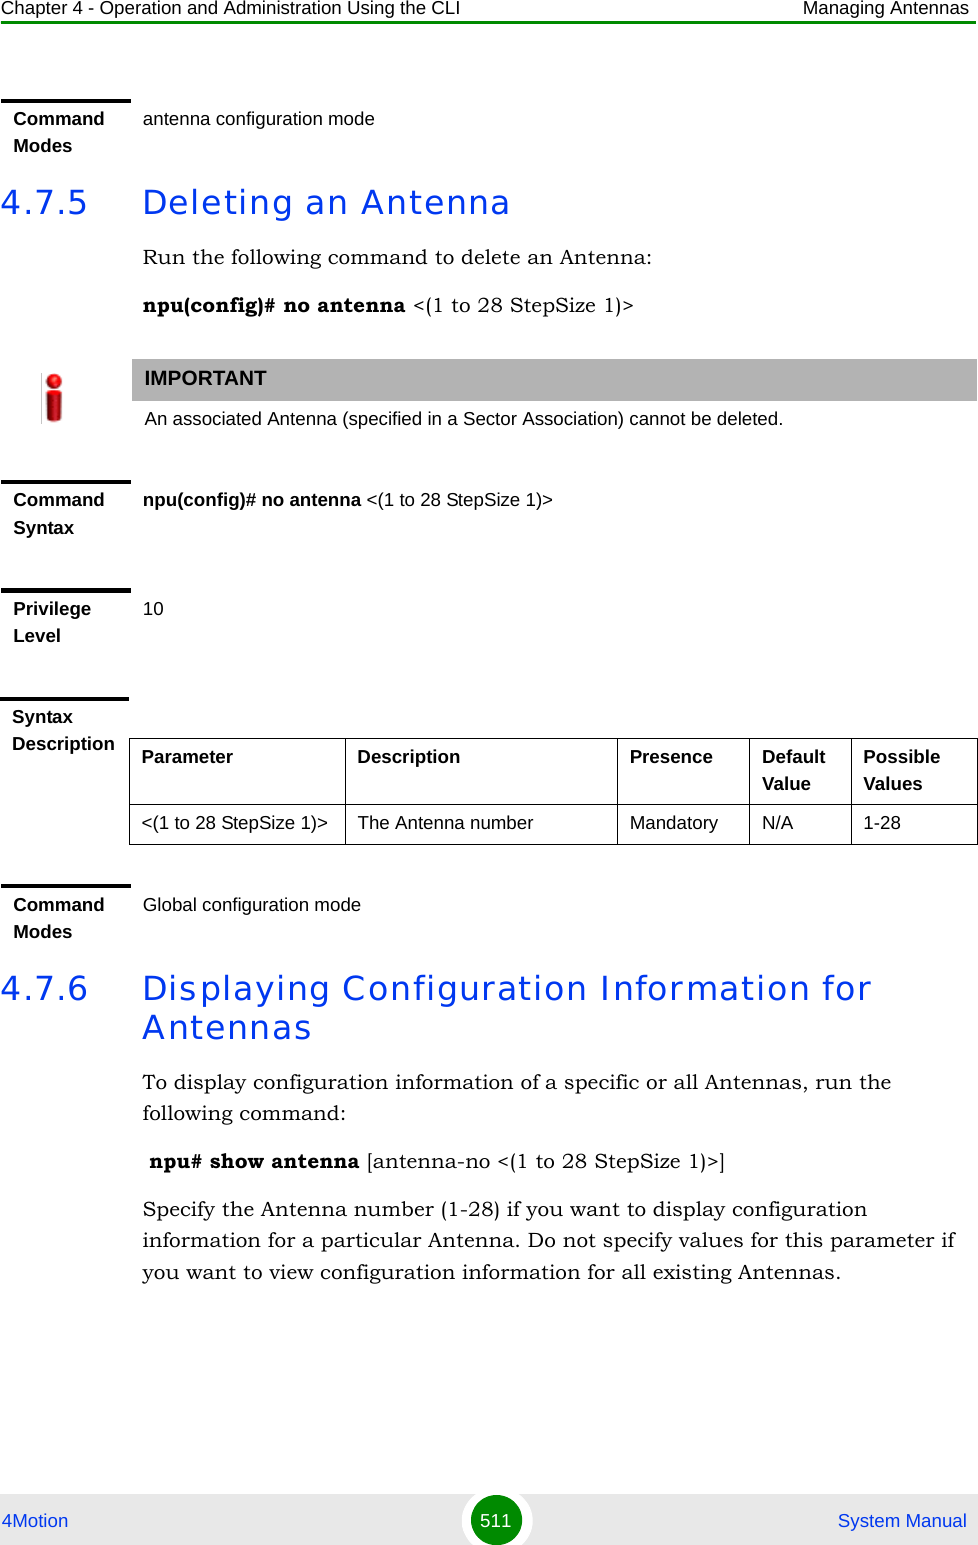 Chapter 4 - Operation and Administration Using the CLI Managing Antennas4Motion 511  System Manual4.7.5 Deleting an AntennaRun the following command to delete an Antenna:npu(config)# no antenna &lt;(1 to 28 StepSize 1)&gt; 4.7.6 Displaying Configuration Information for AntennasTo display configuration information of a specific or all Antennas, run the following command: npu# show antenna [antenna-no &lt;(1 to 28 StepSize 1)&gt;]Specify the Antenna number (1-28) if you want to display configuration information for a particular Antenna. Do not specify values for this parameter if you want to view configuration information for all existing Antennas.Command Modesantenna configuration modeIMPORTANTAn associated Antenna (specified in a Sector Association) cannot be deleted.Command Syntaxnpu(config)# no antenna &lt;(1 to 28 StepSize 1)&gt; Privilege Level10Syntax Description Parameter Description Presence Default ValuePossible Values&lt;(1 to 28 StepSize 1)&gt; The Antenna number  Mandatory N/A 1-28Command ModesGlobal configuration mode